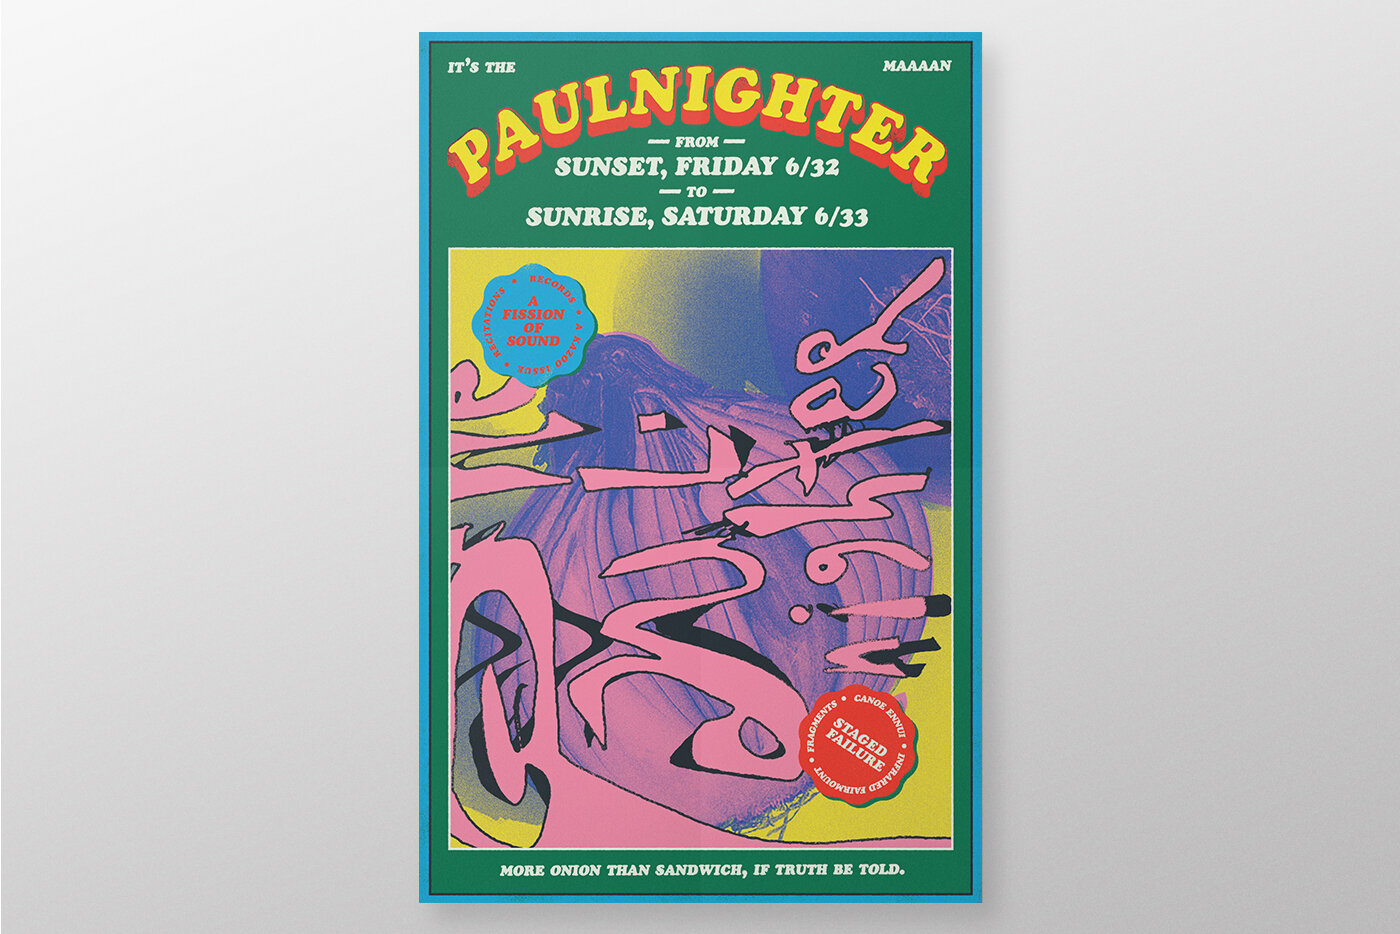 The Paul Nighter radio show poster